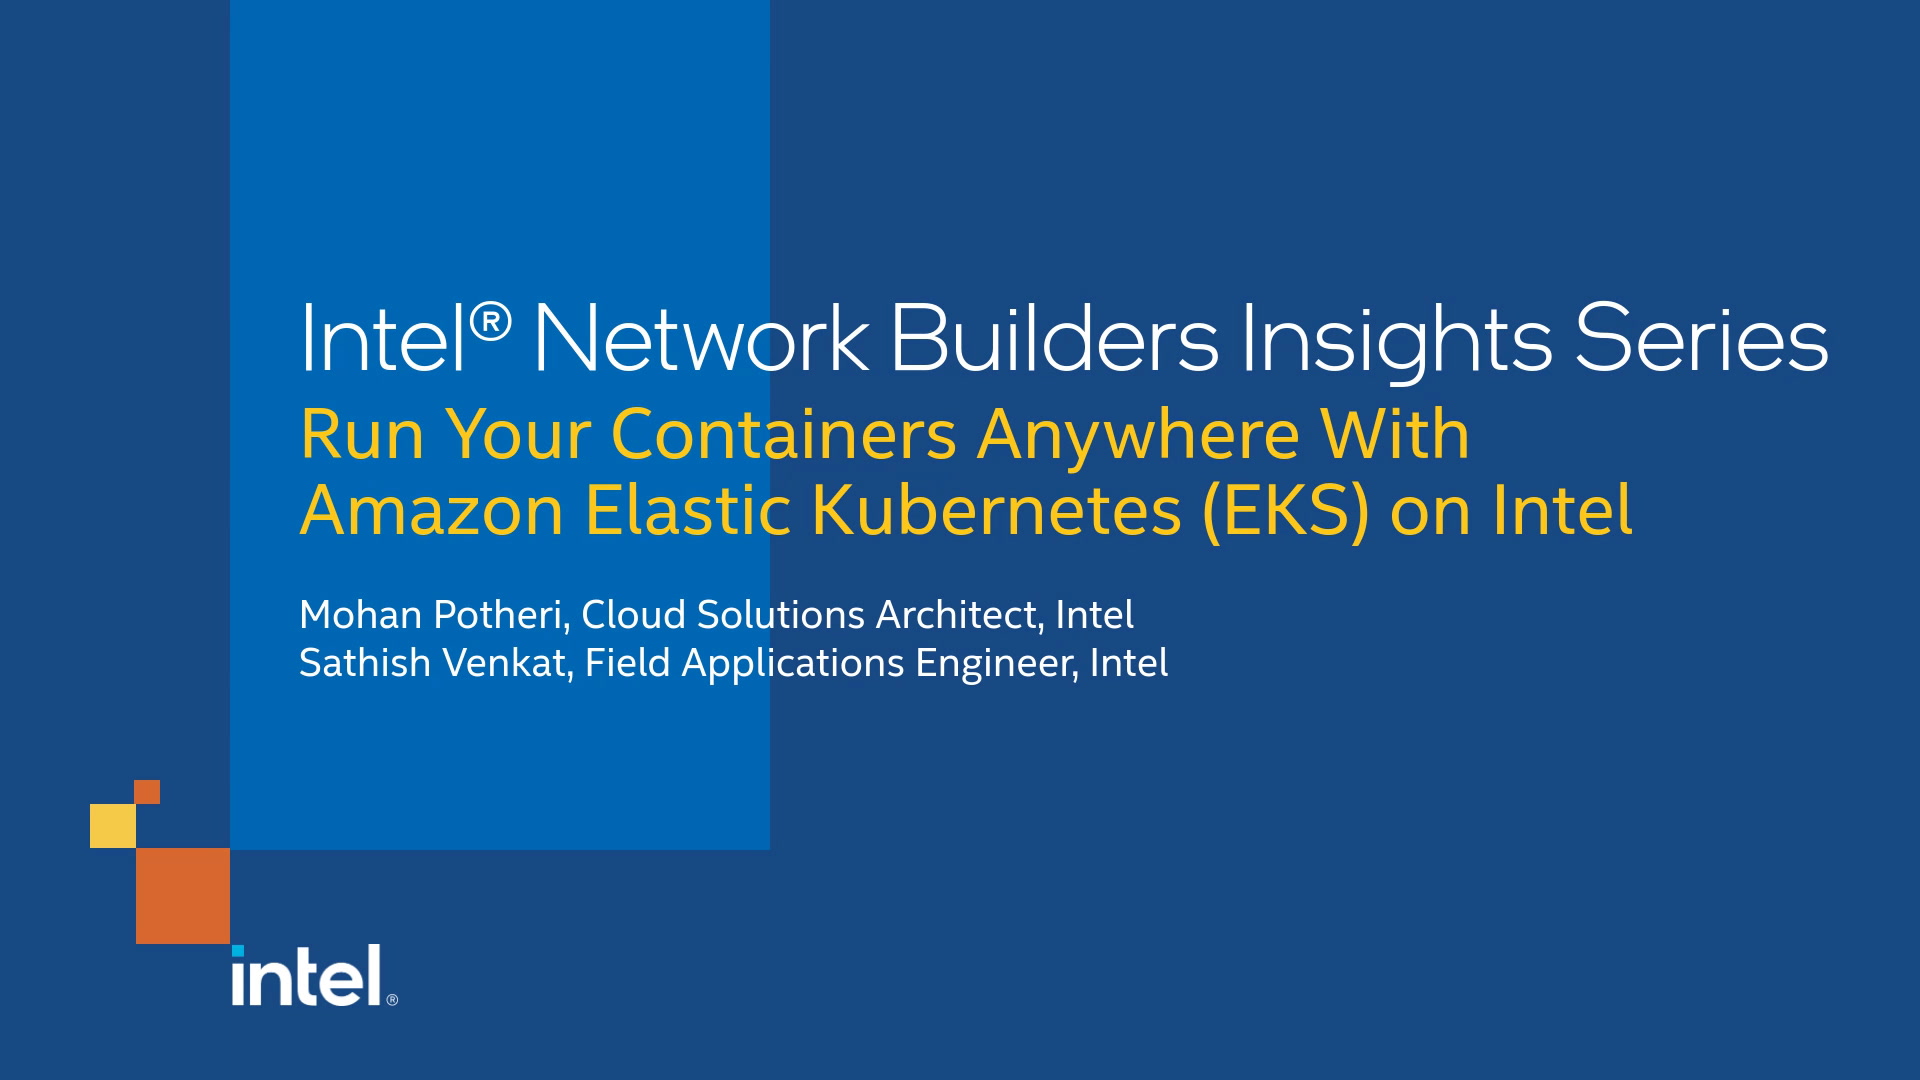 Run Your Containers Anywhere With Amazon Elastic Kubernetes (EKS) on Intel